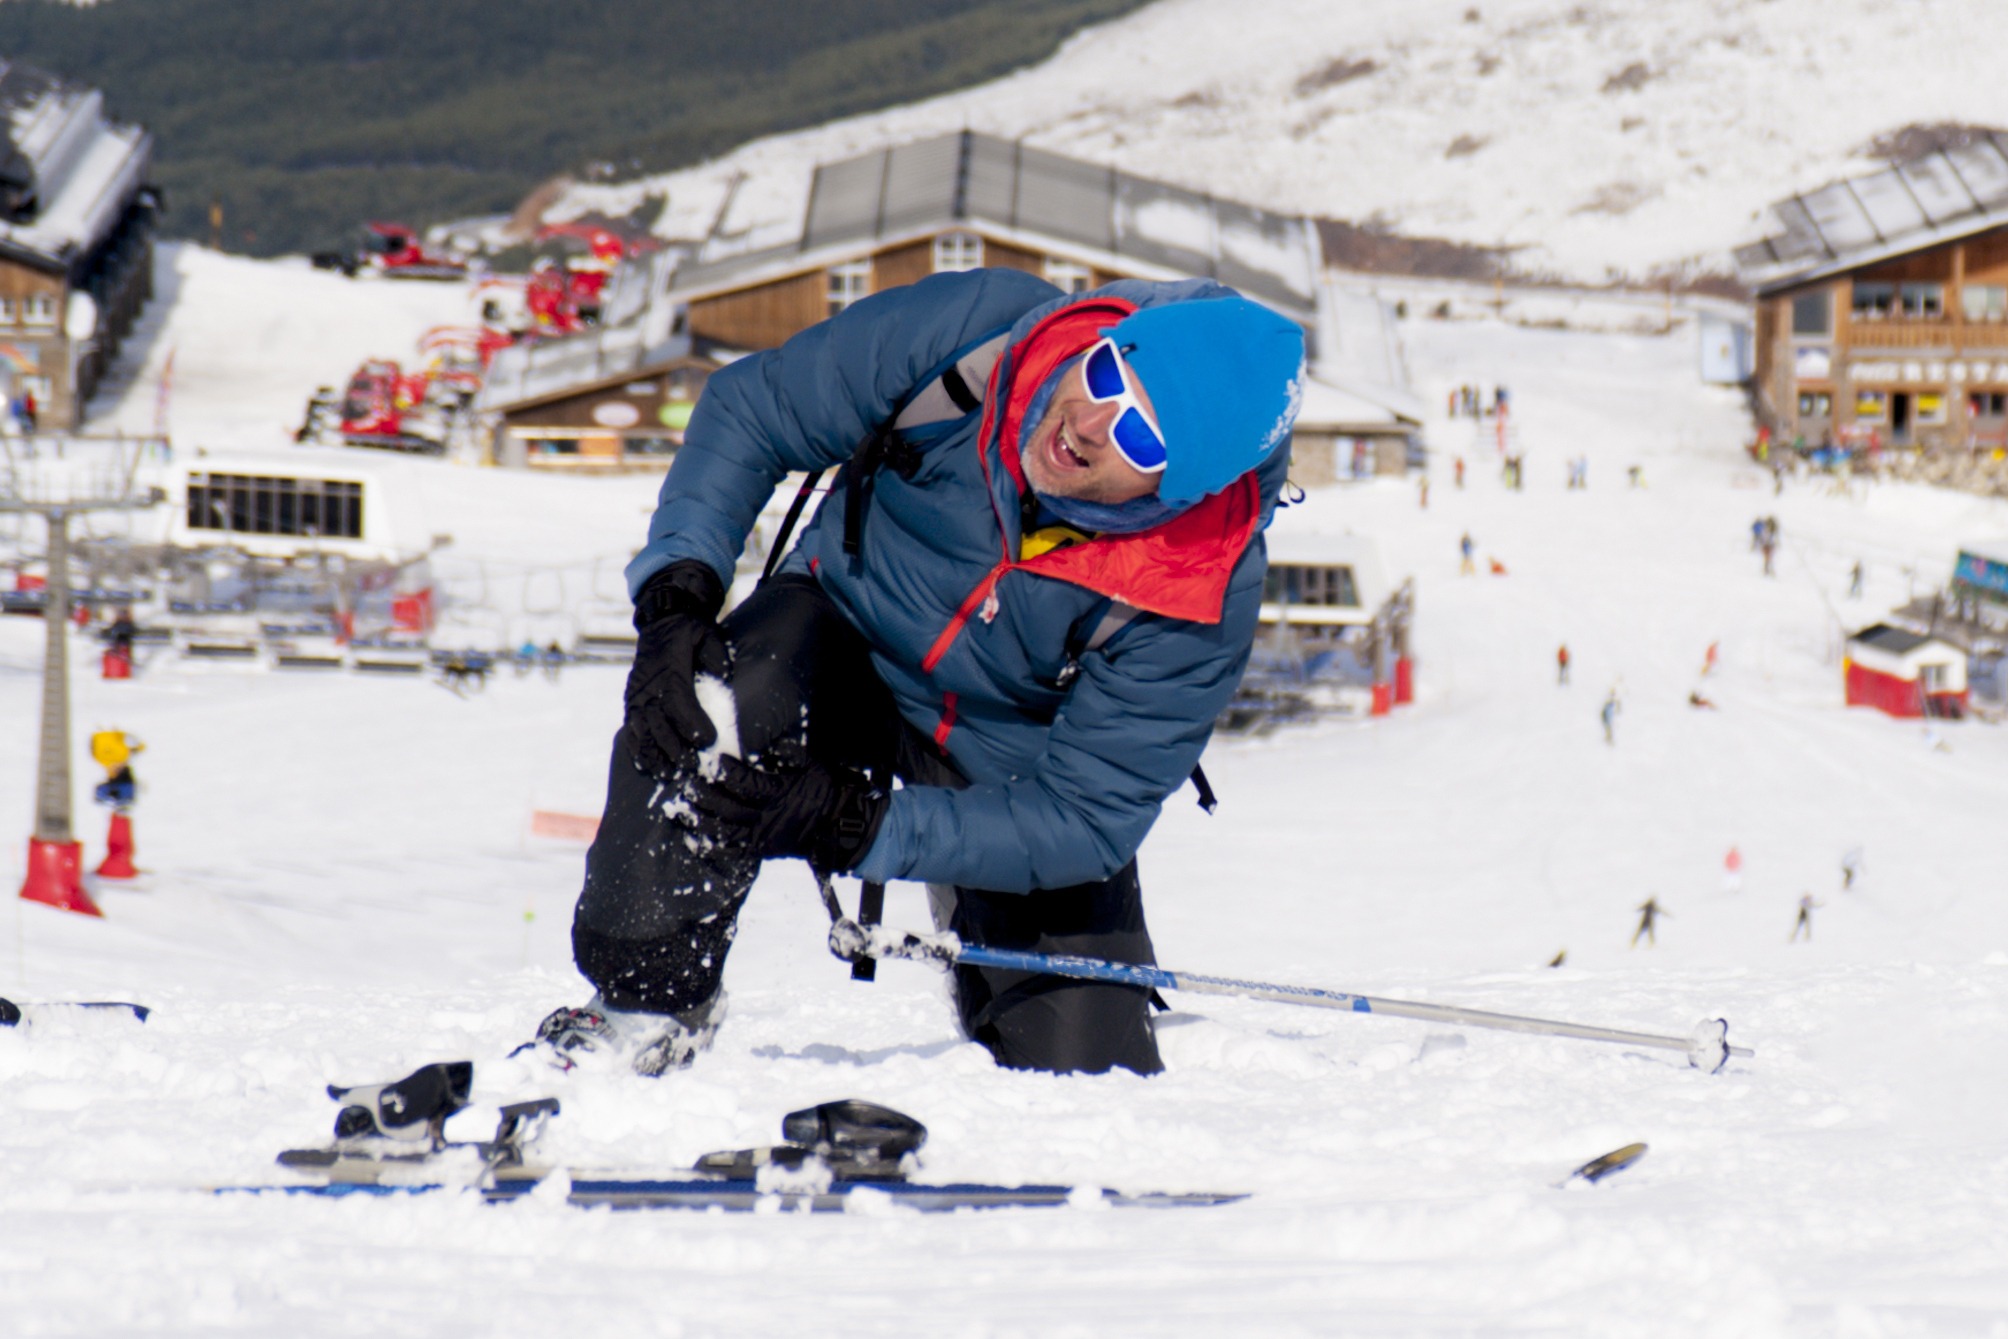 A man experiencing pain on a ski slope